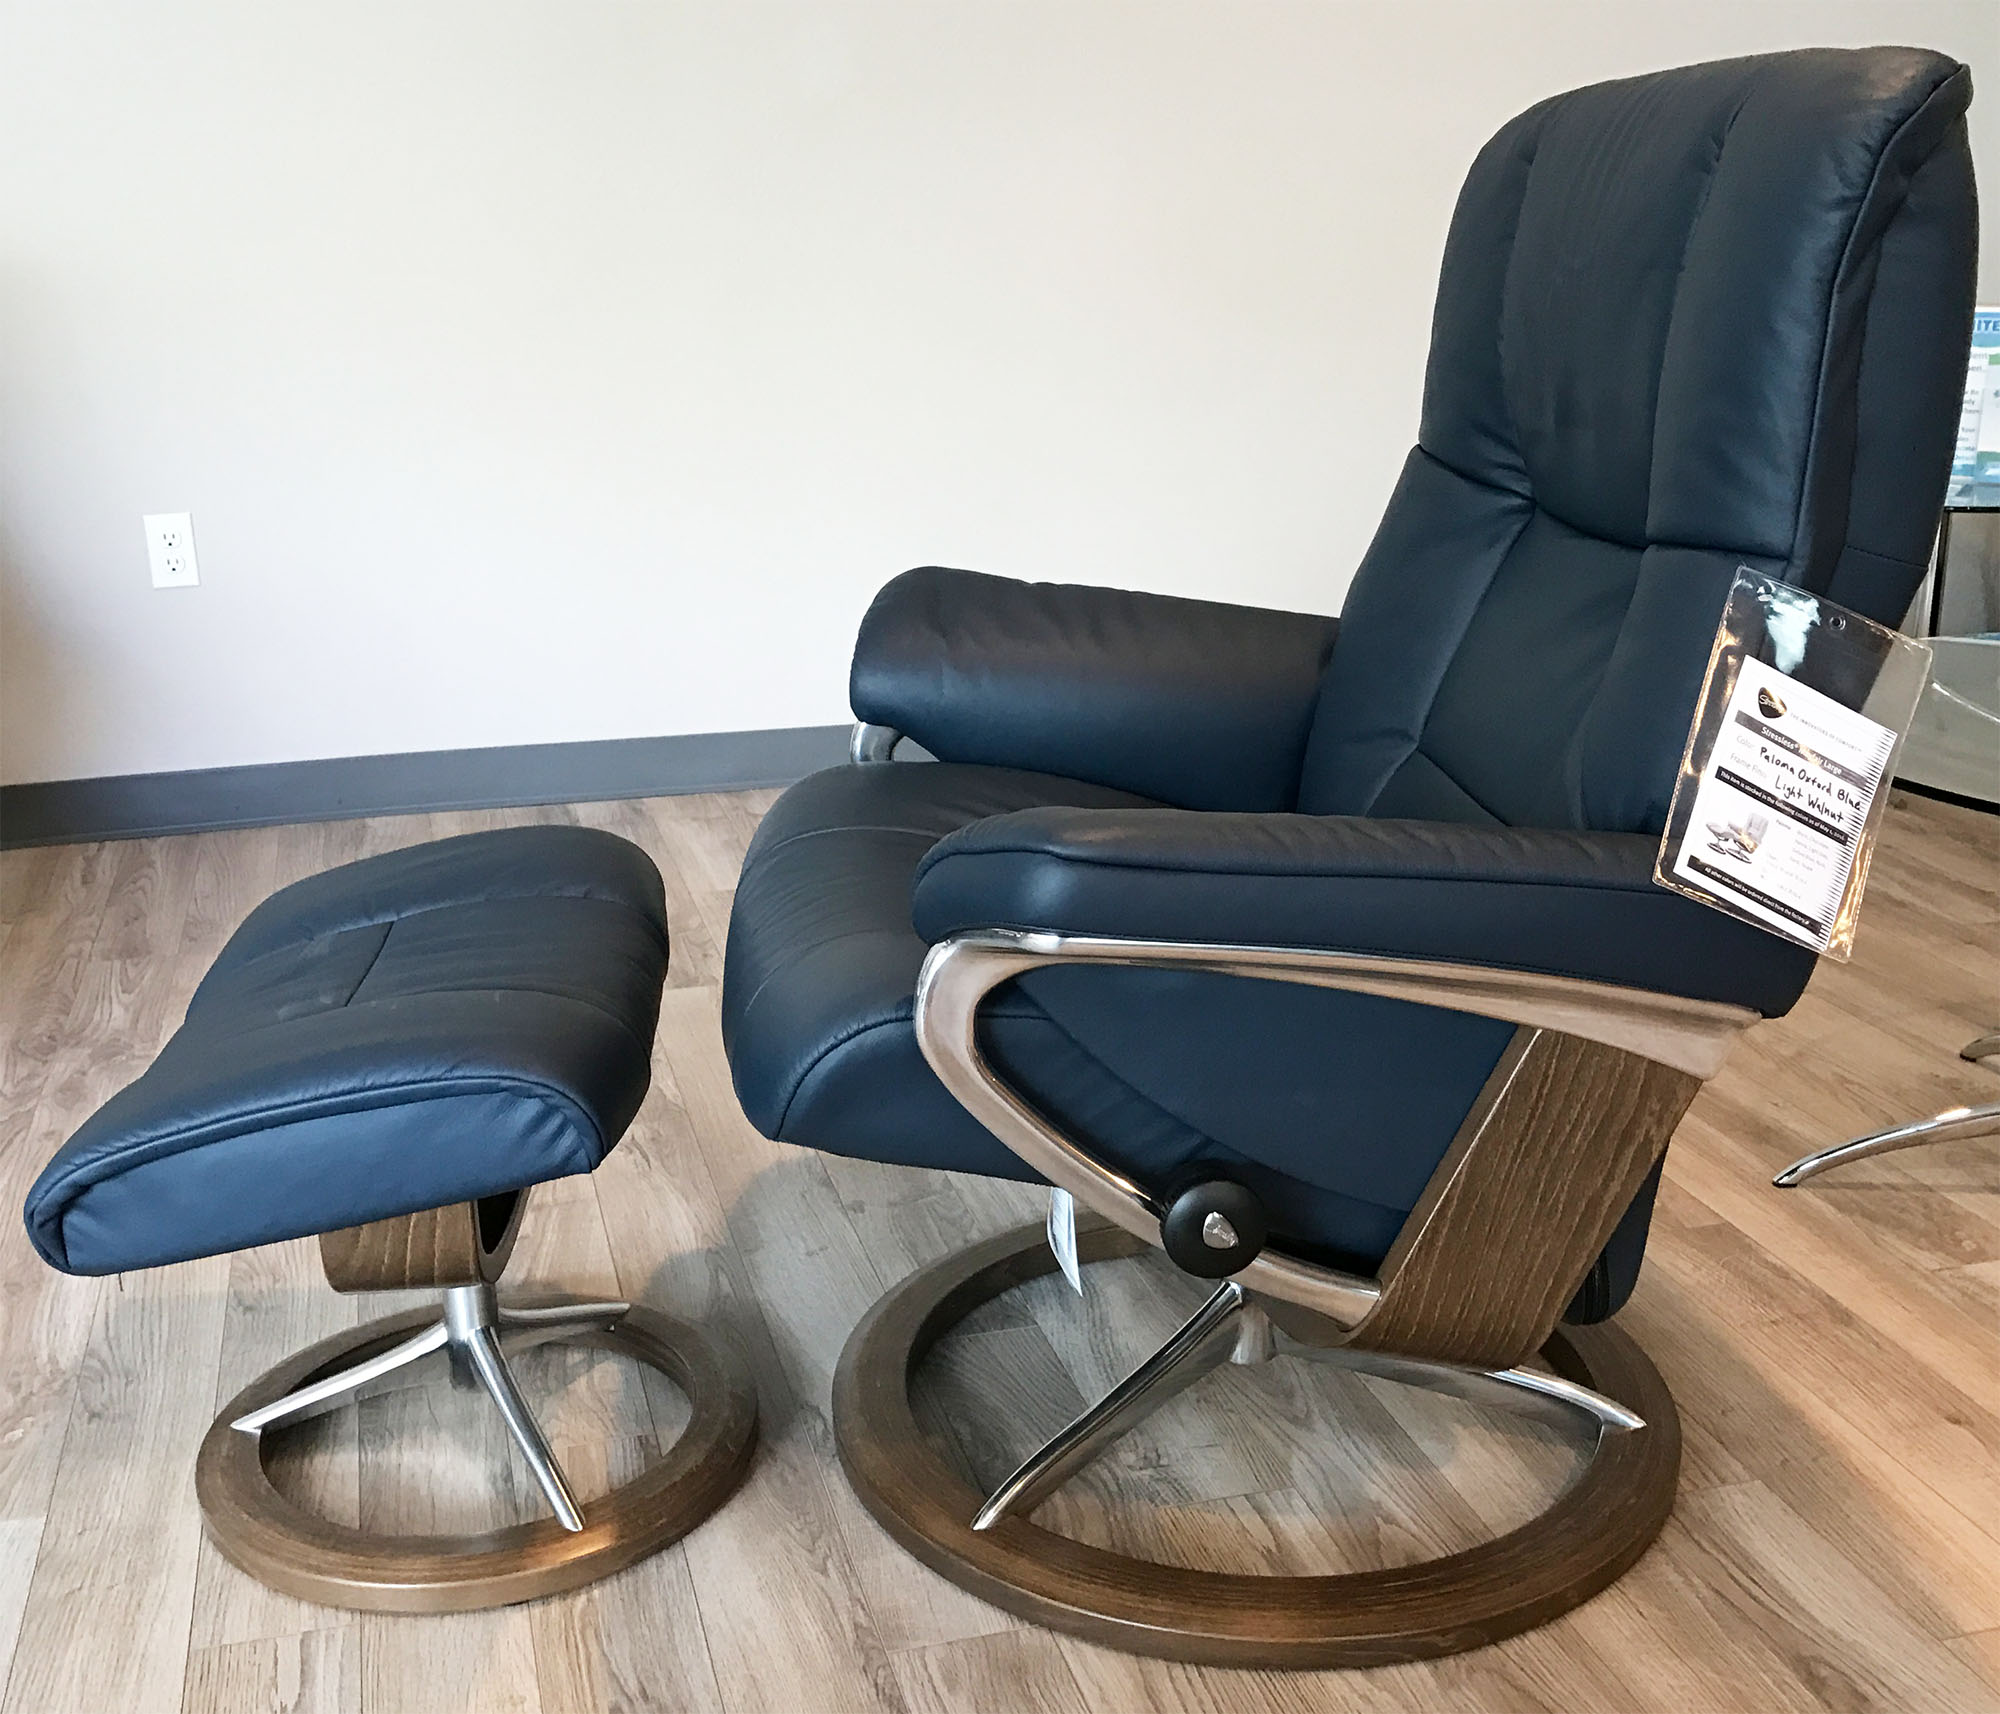 Mayfair Signature by Recliner Blue Ekornes and Wood Oxford Ottoman Leather Stressless Paloma Walnut Chair